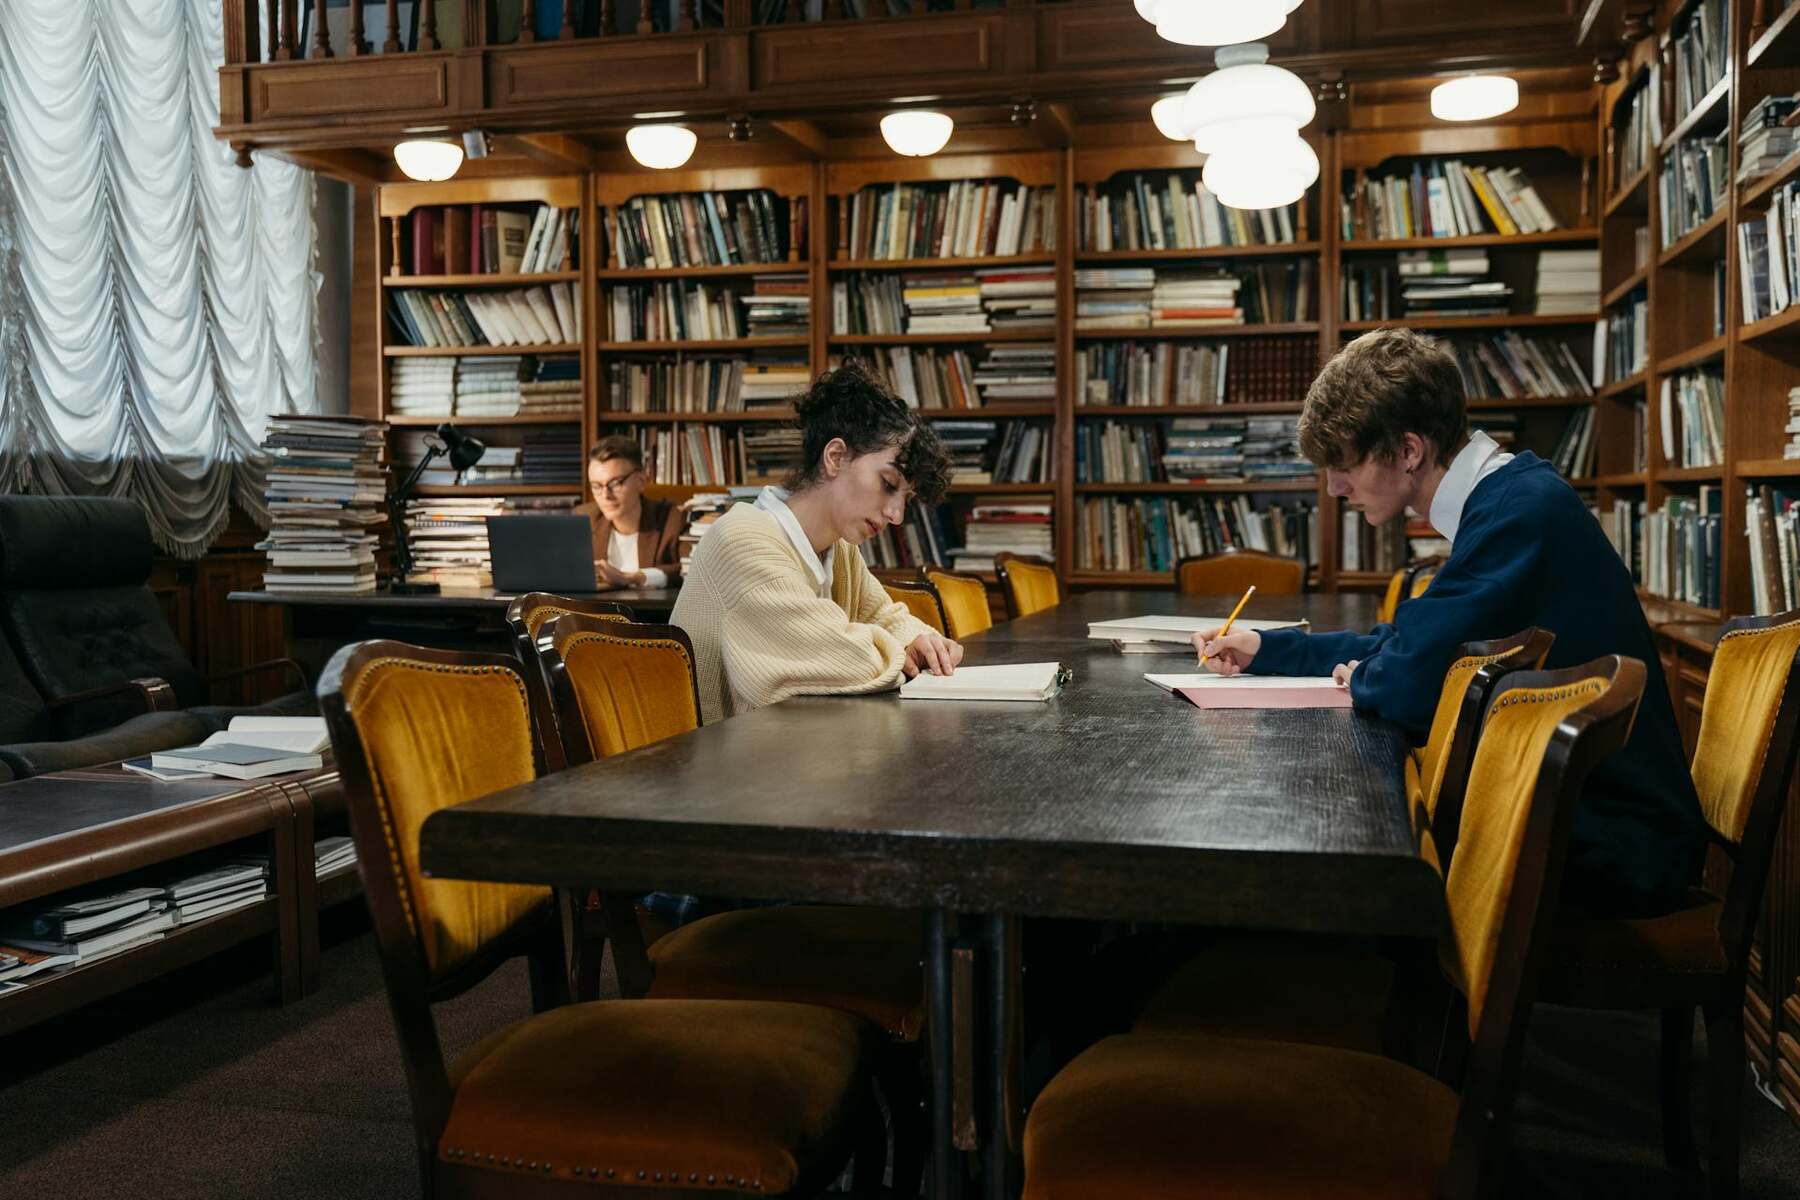 Two individuals studying together at a library table